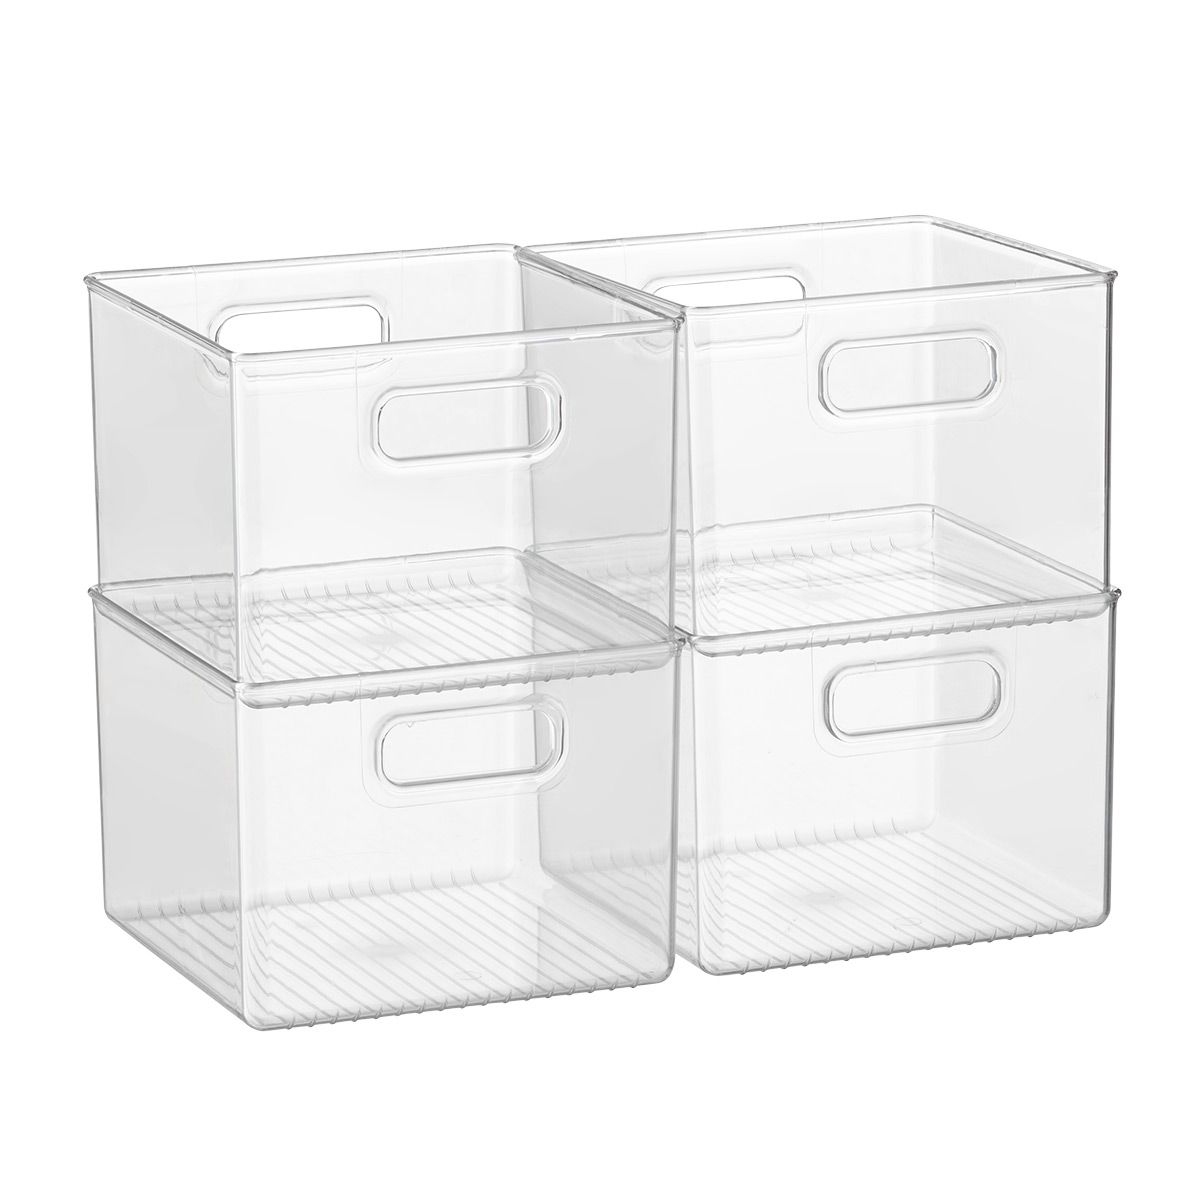 iDesign Linus Pantry Bins | The Container Store